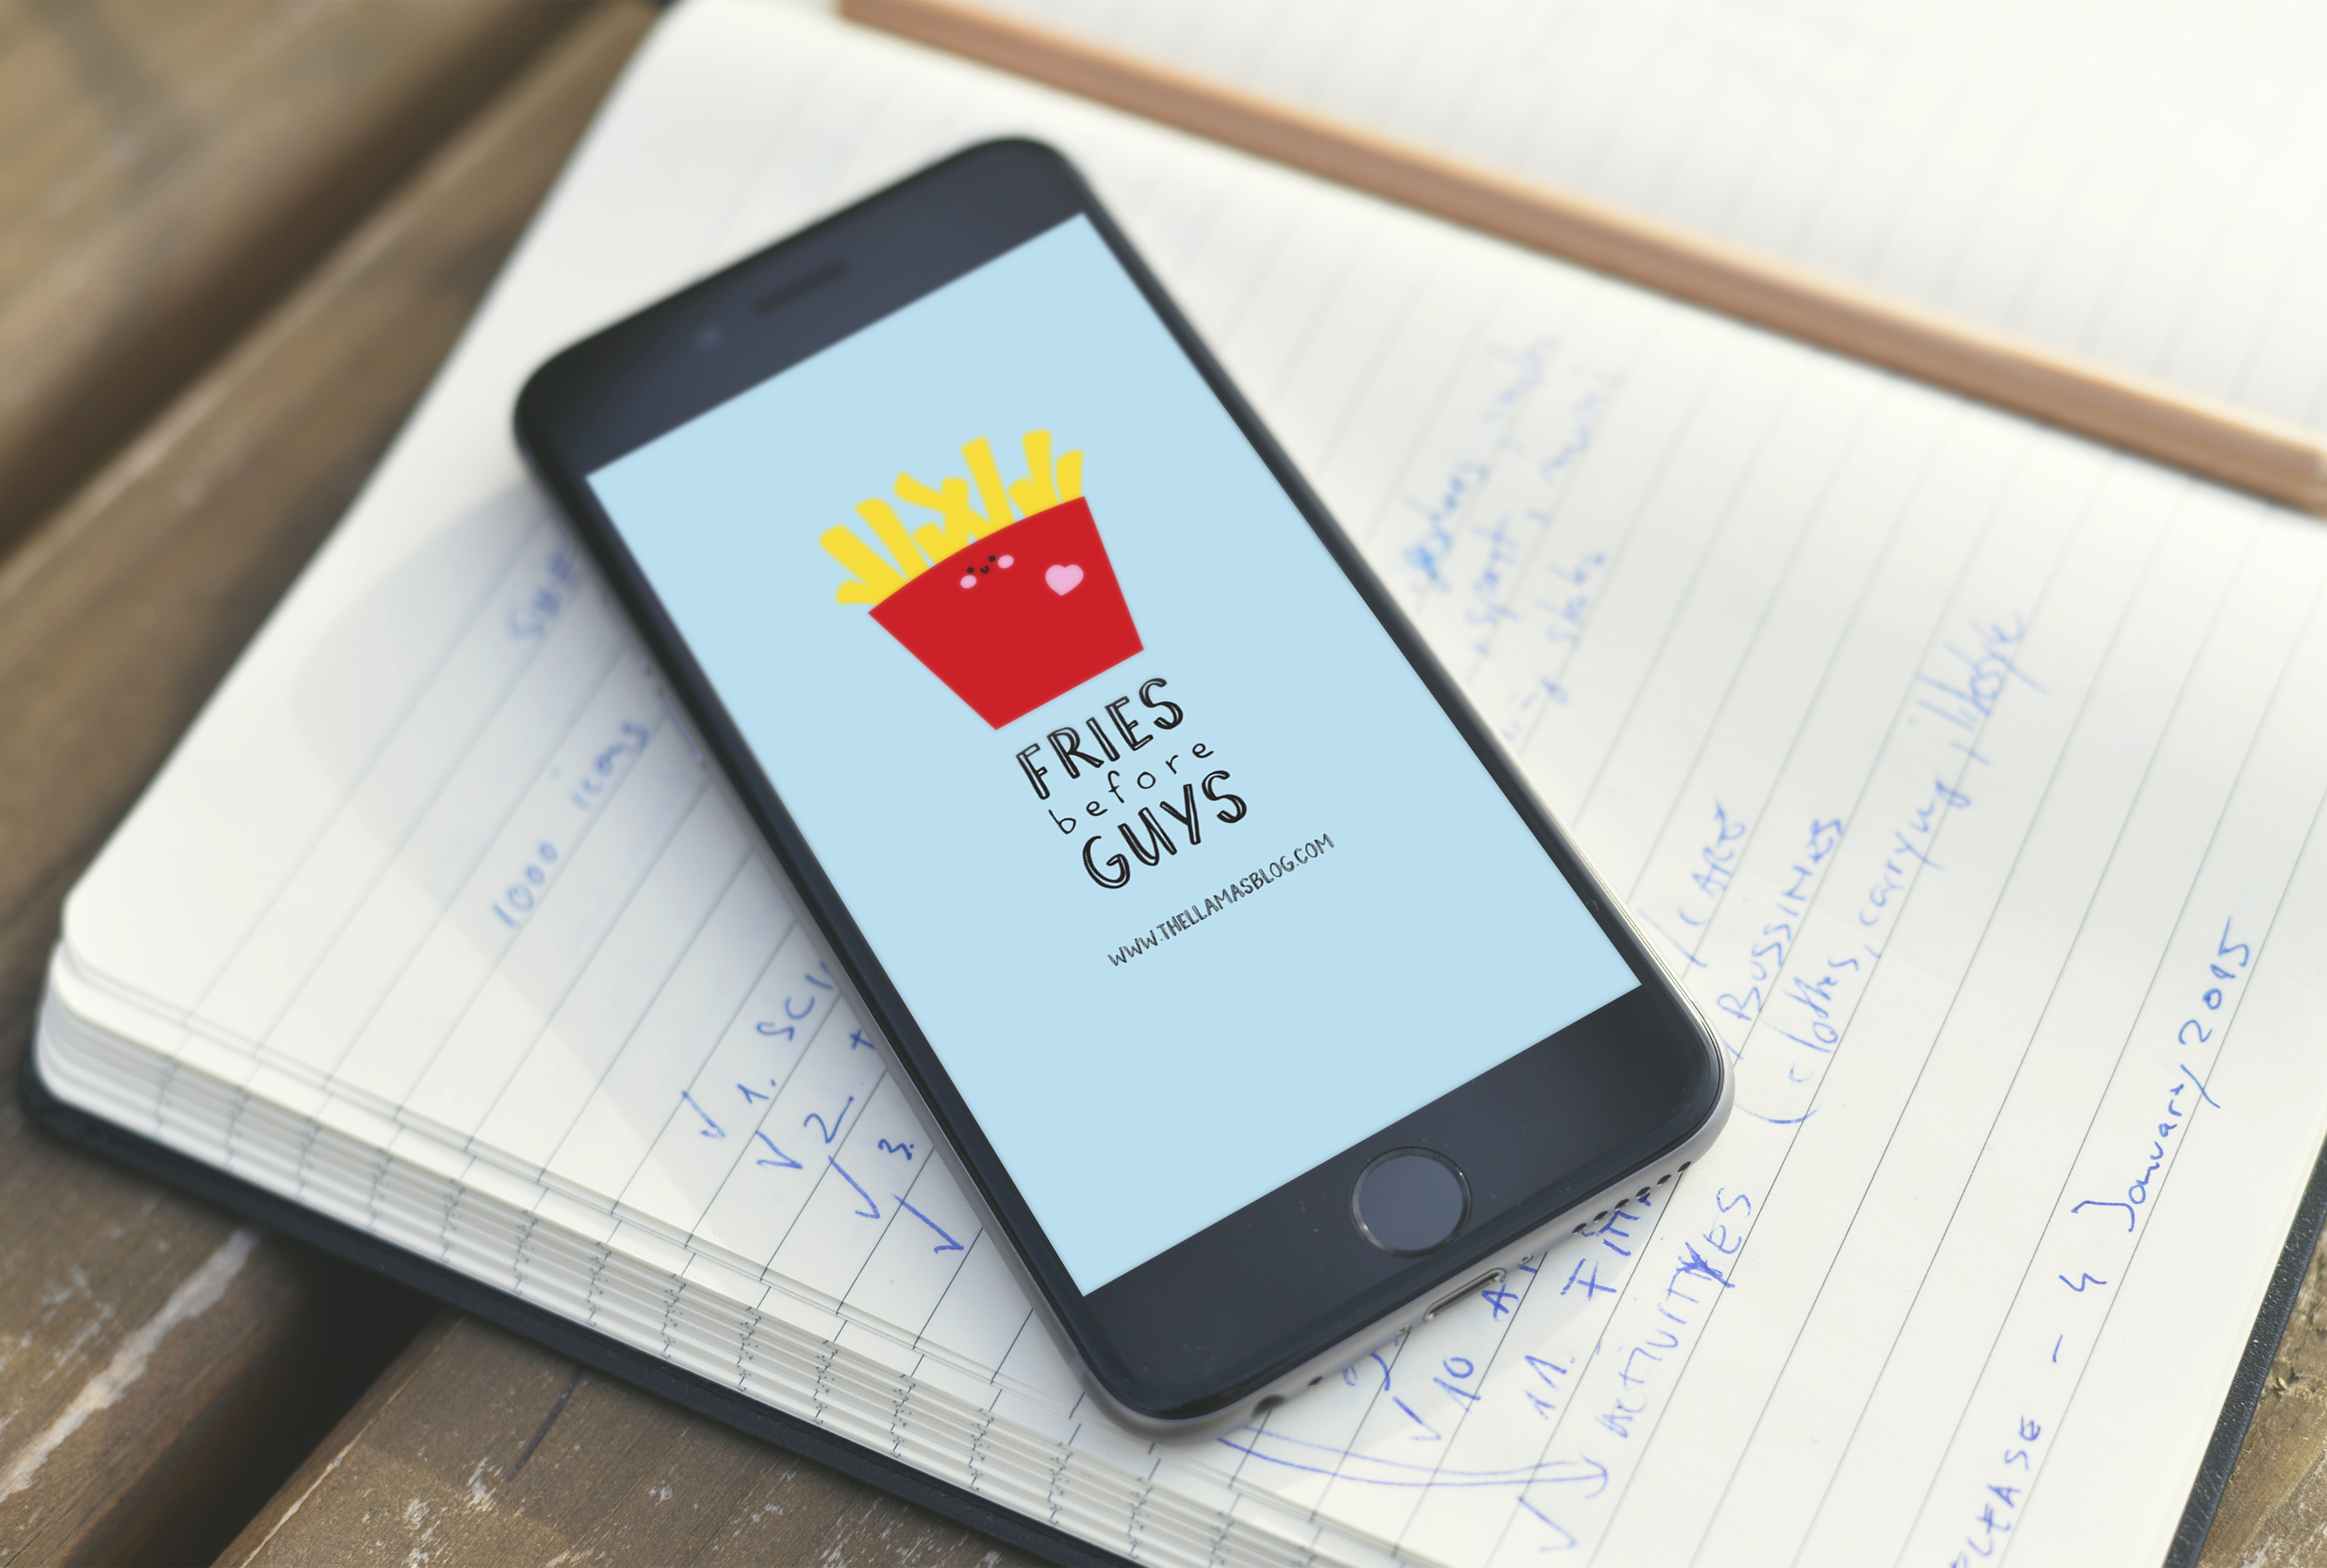 fries before guys free wallpapers for pc and mobile